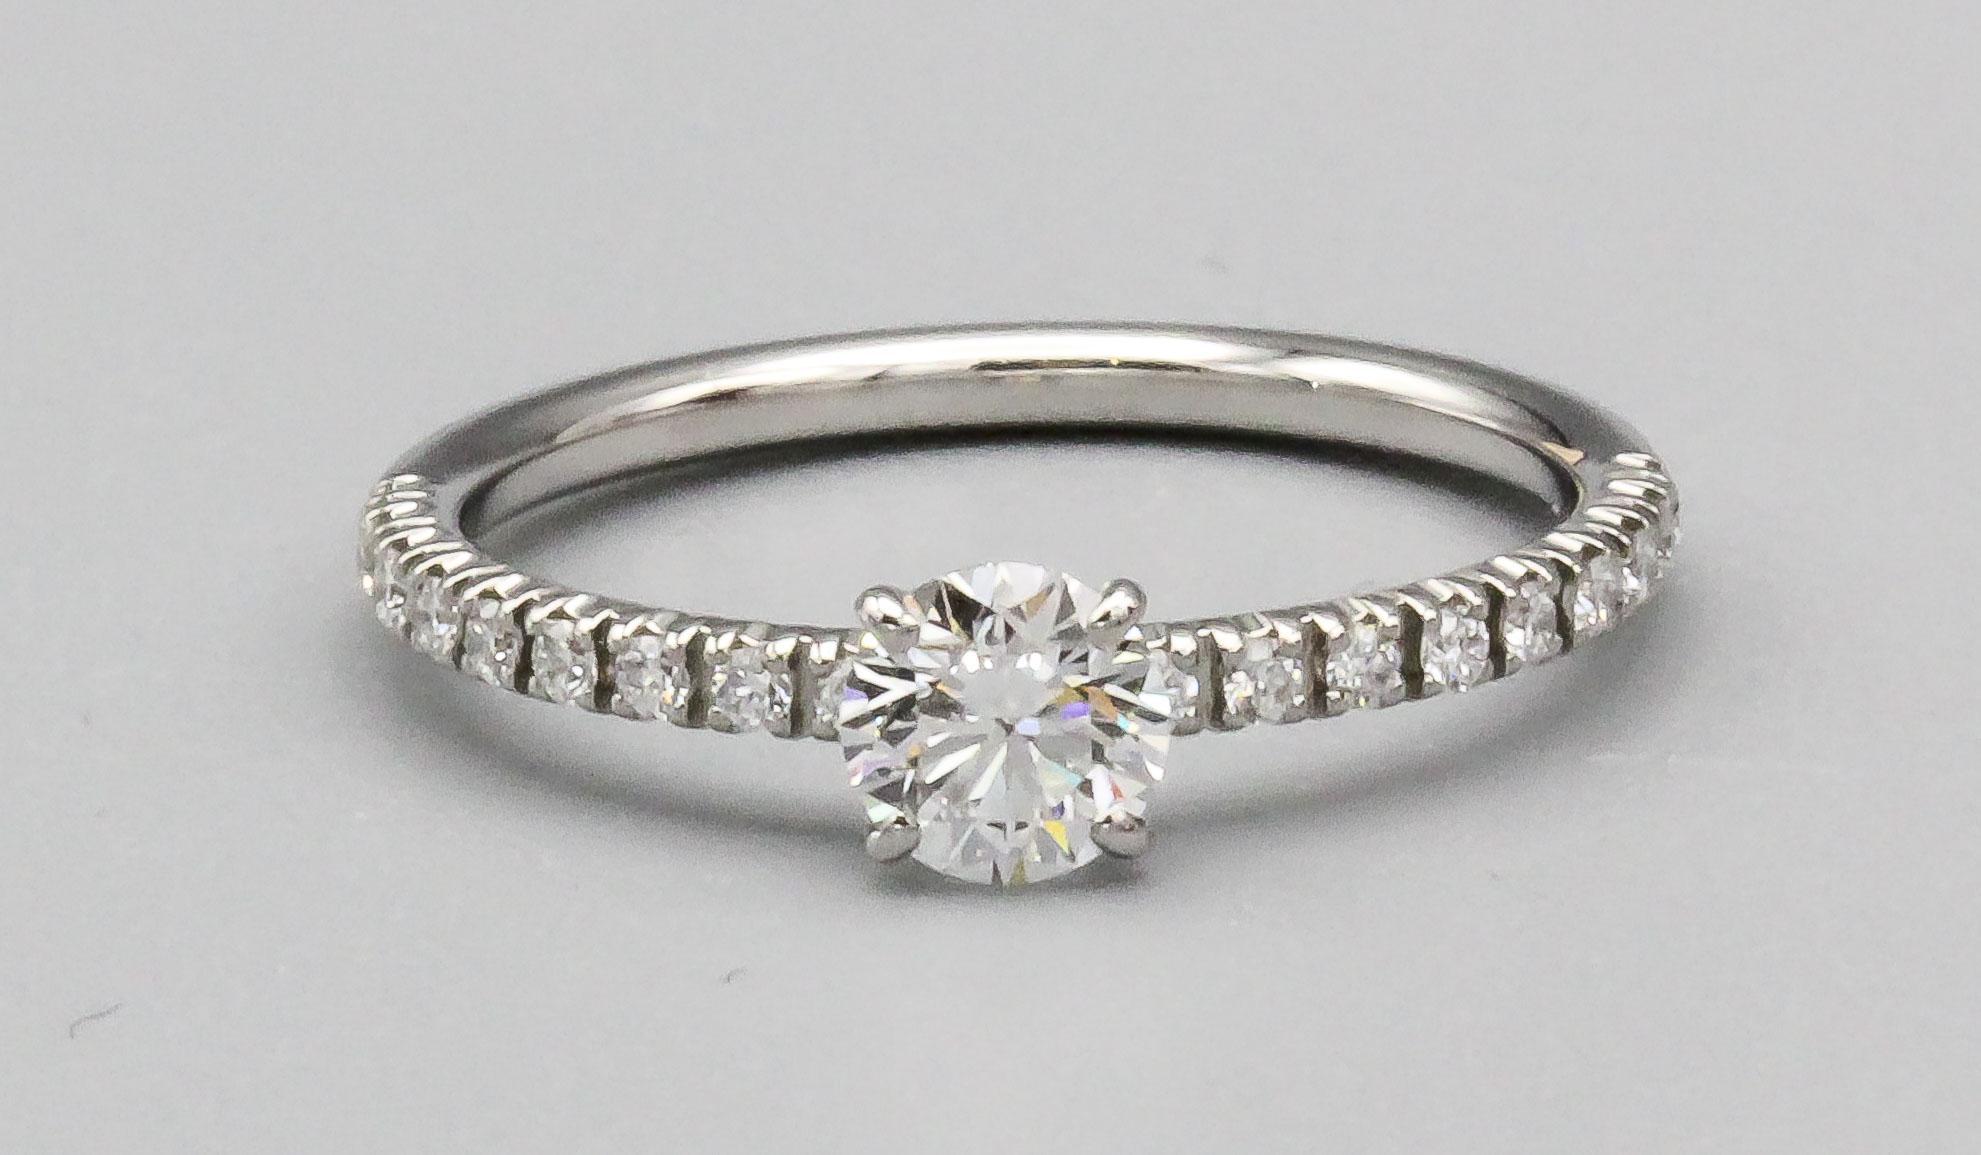 This fine Cartier diamond and platinum engagement ring is a beautiful and timeless piece of jewelry designed by the luxury brand Cartier. This stunning engagement ring features a high-quality diamond that has been certified by the Gemological